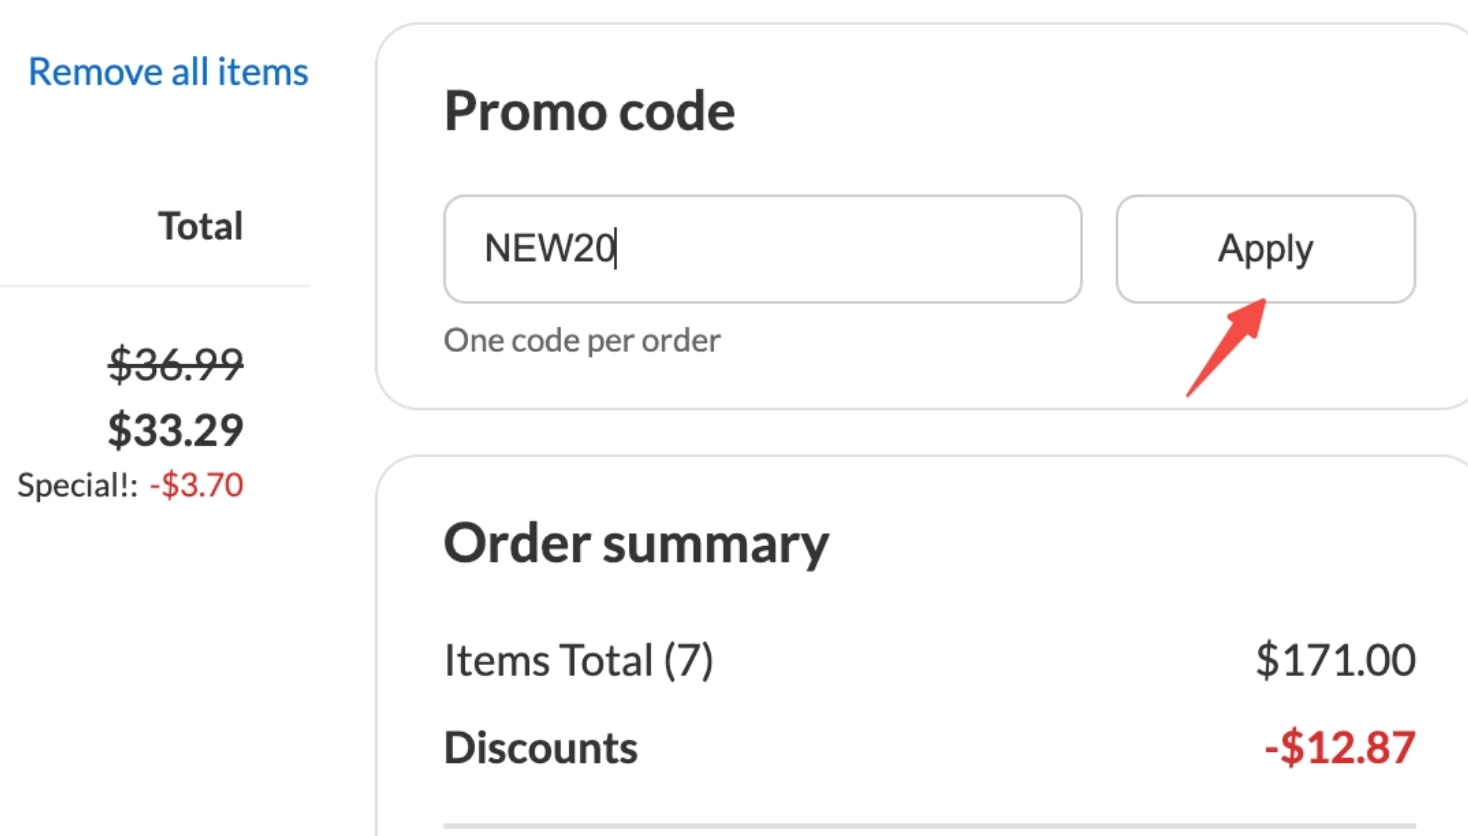 Step 3: When checking out at australiandream.com, paste the discount code into the specified promotional code box.